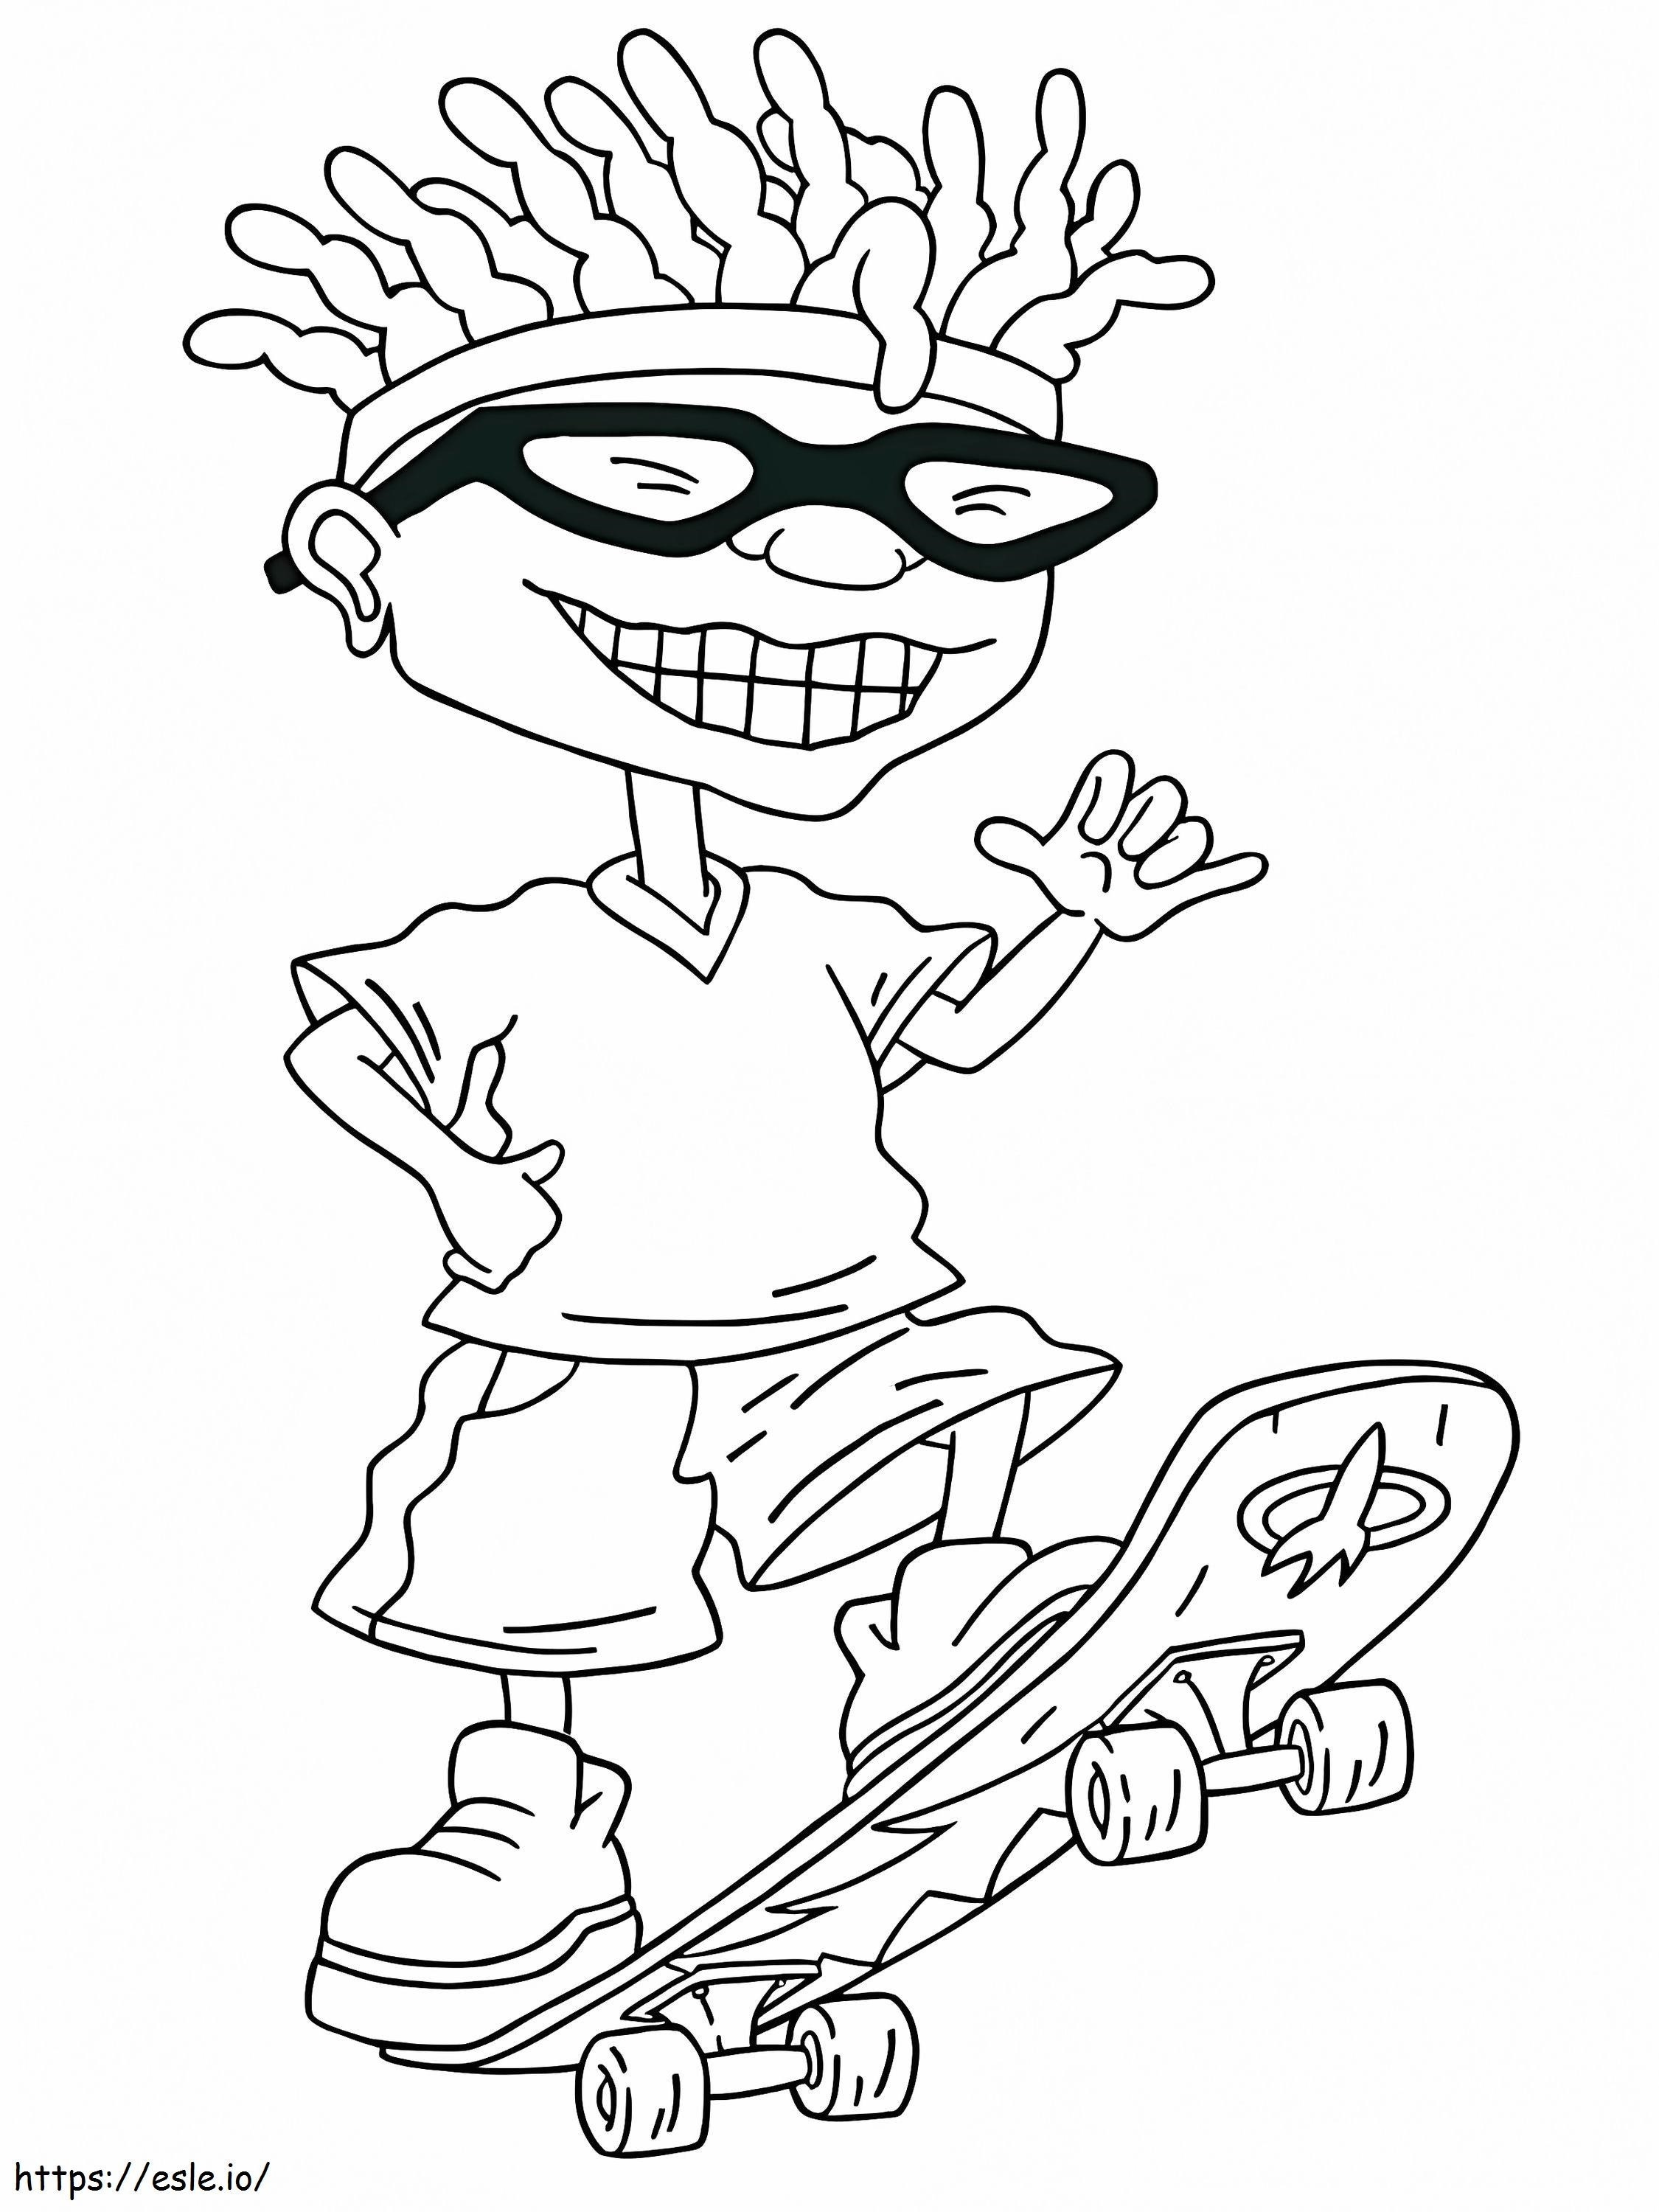 Otto Rocket From Rocket Power 1 coloring page